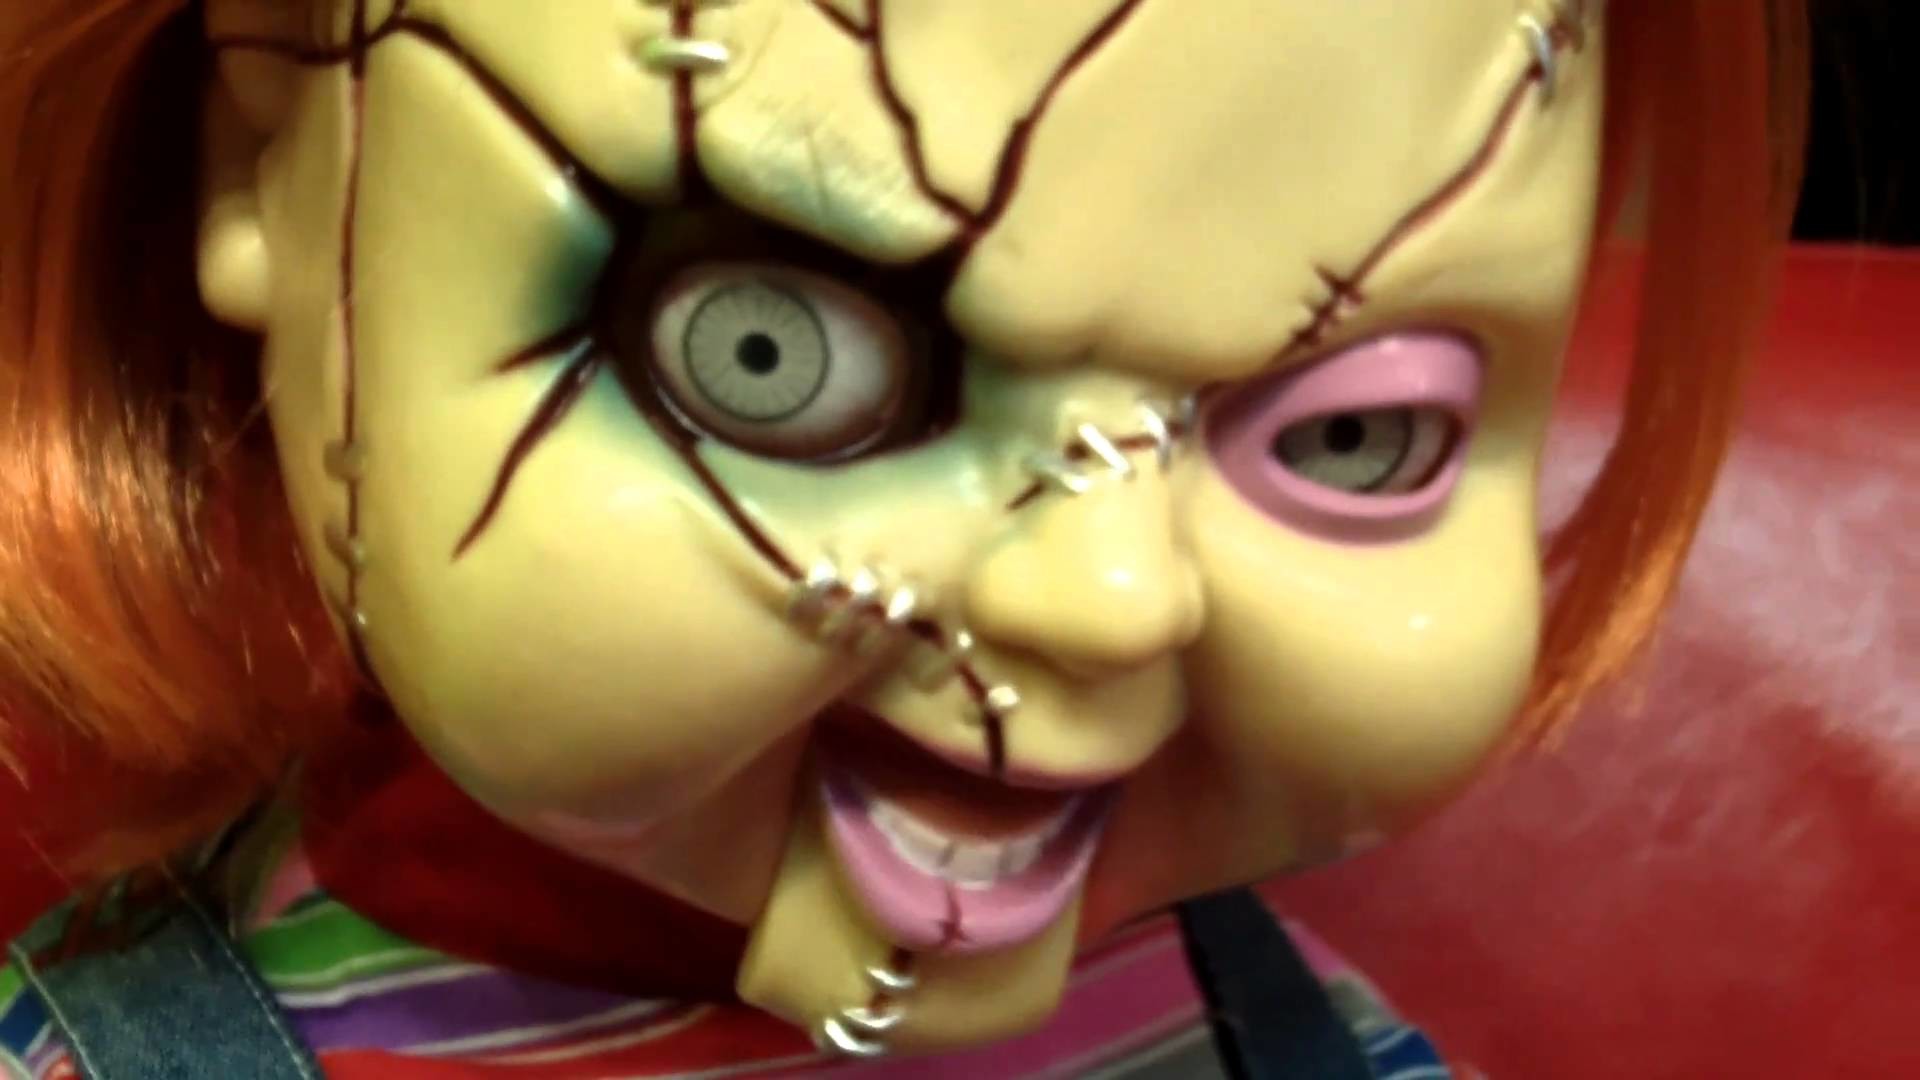 1920x1080 Chucky SCARY Animated Life-Size Talking Doll by Mike Mozart of  TheToyChannel - YouTube